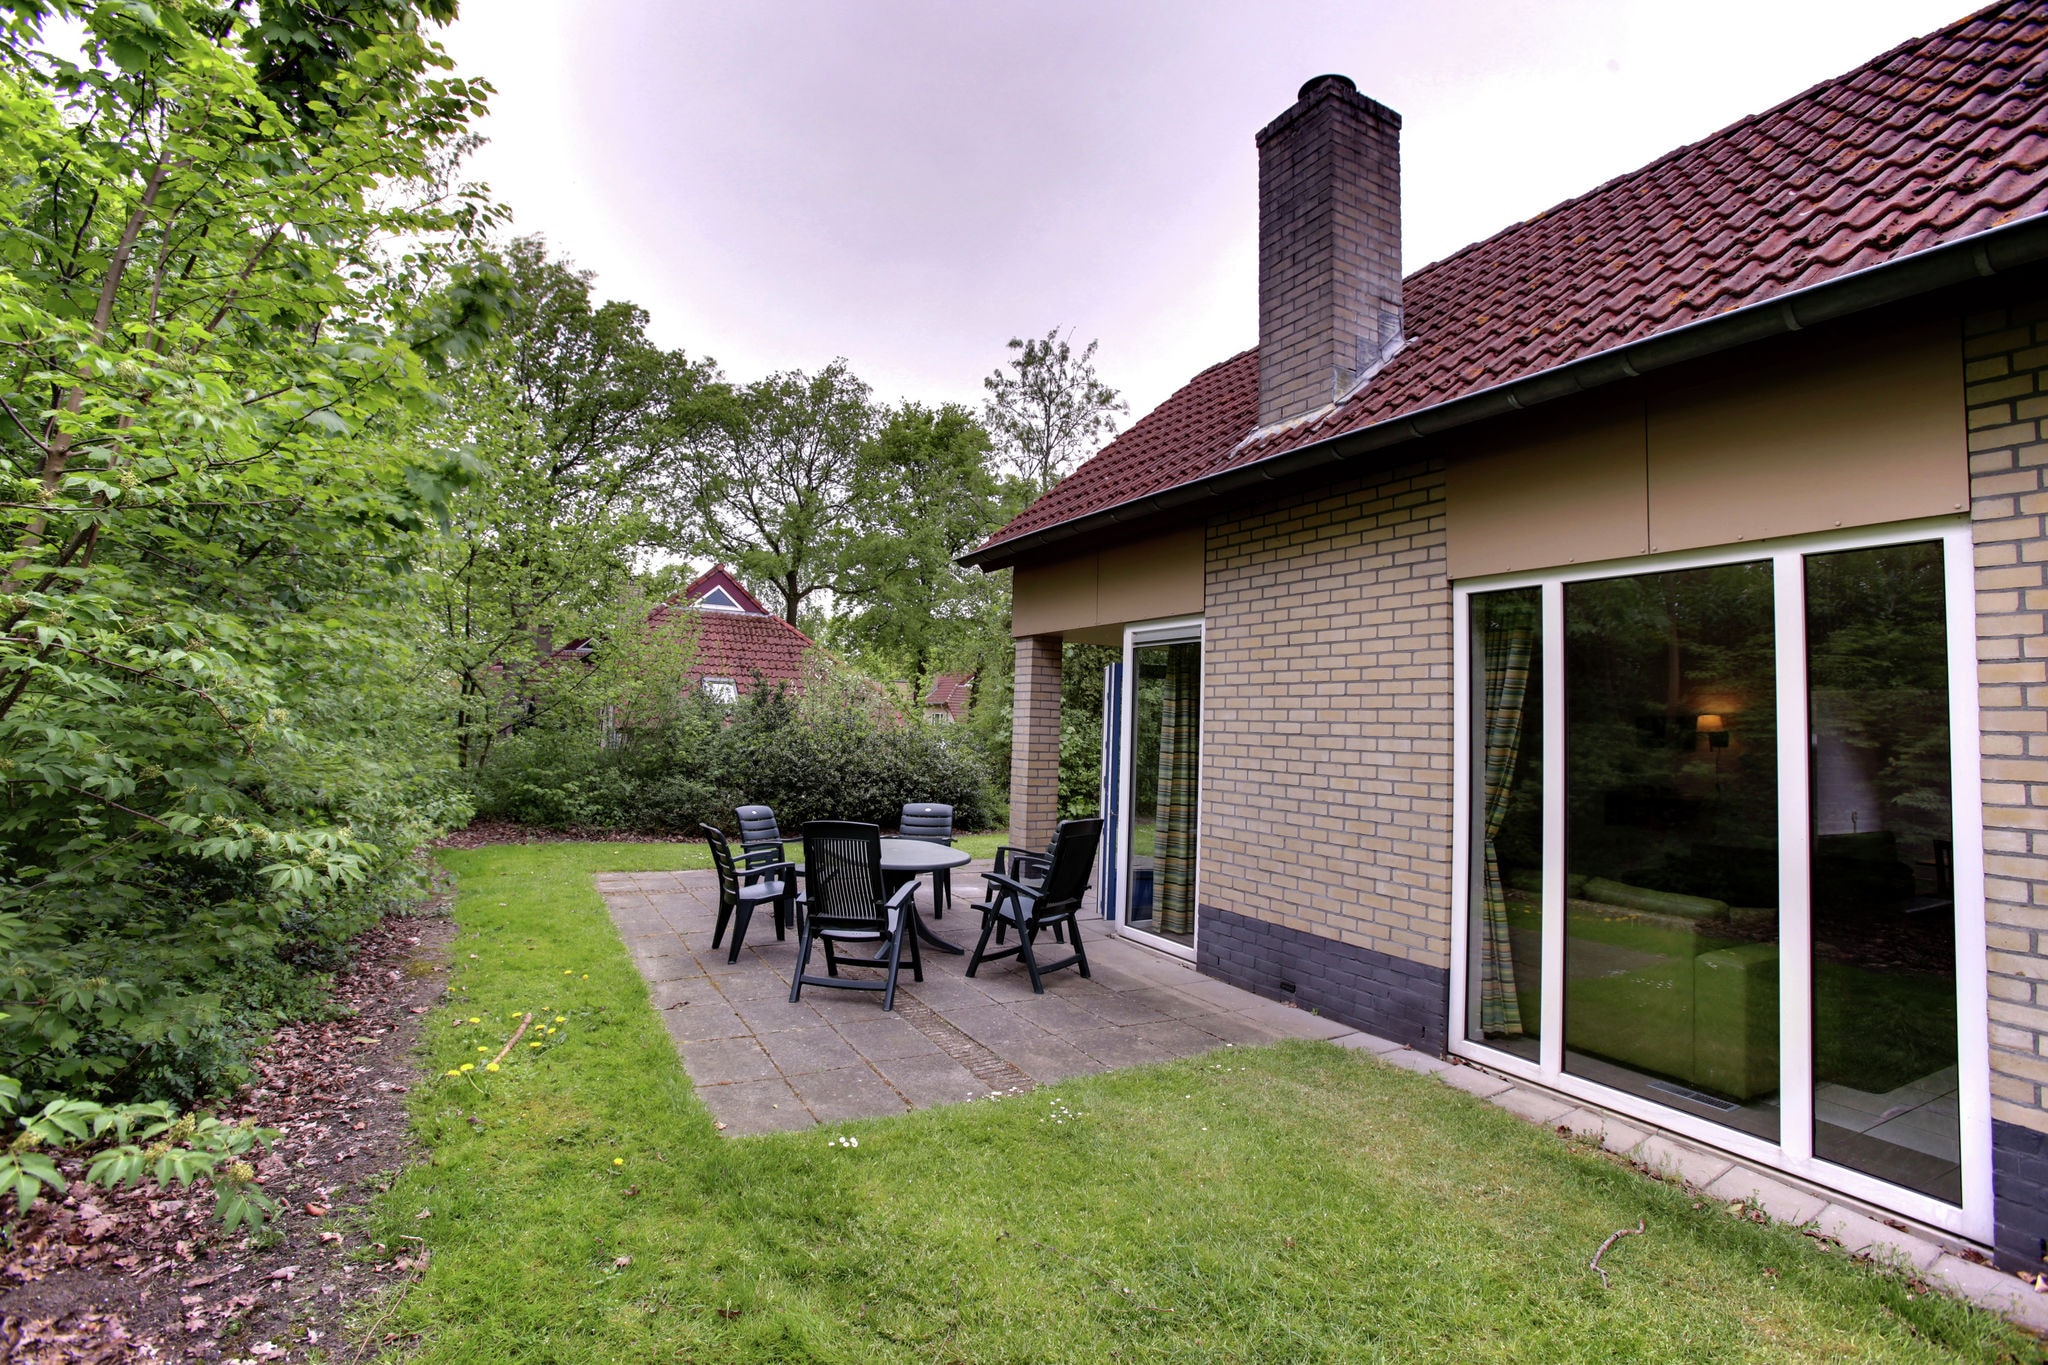 Cozy holiday home with a garden, near Zwolle